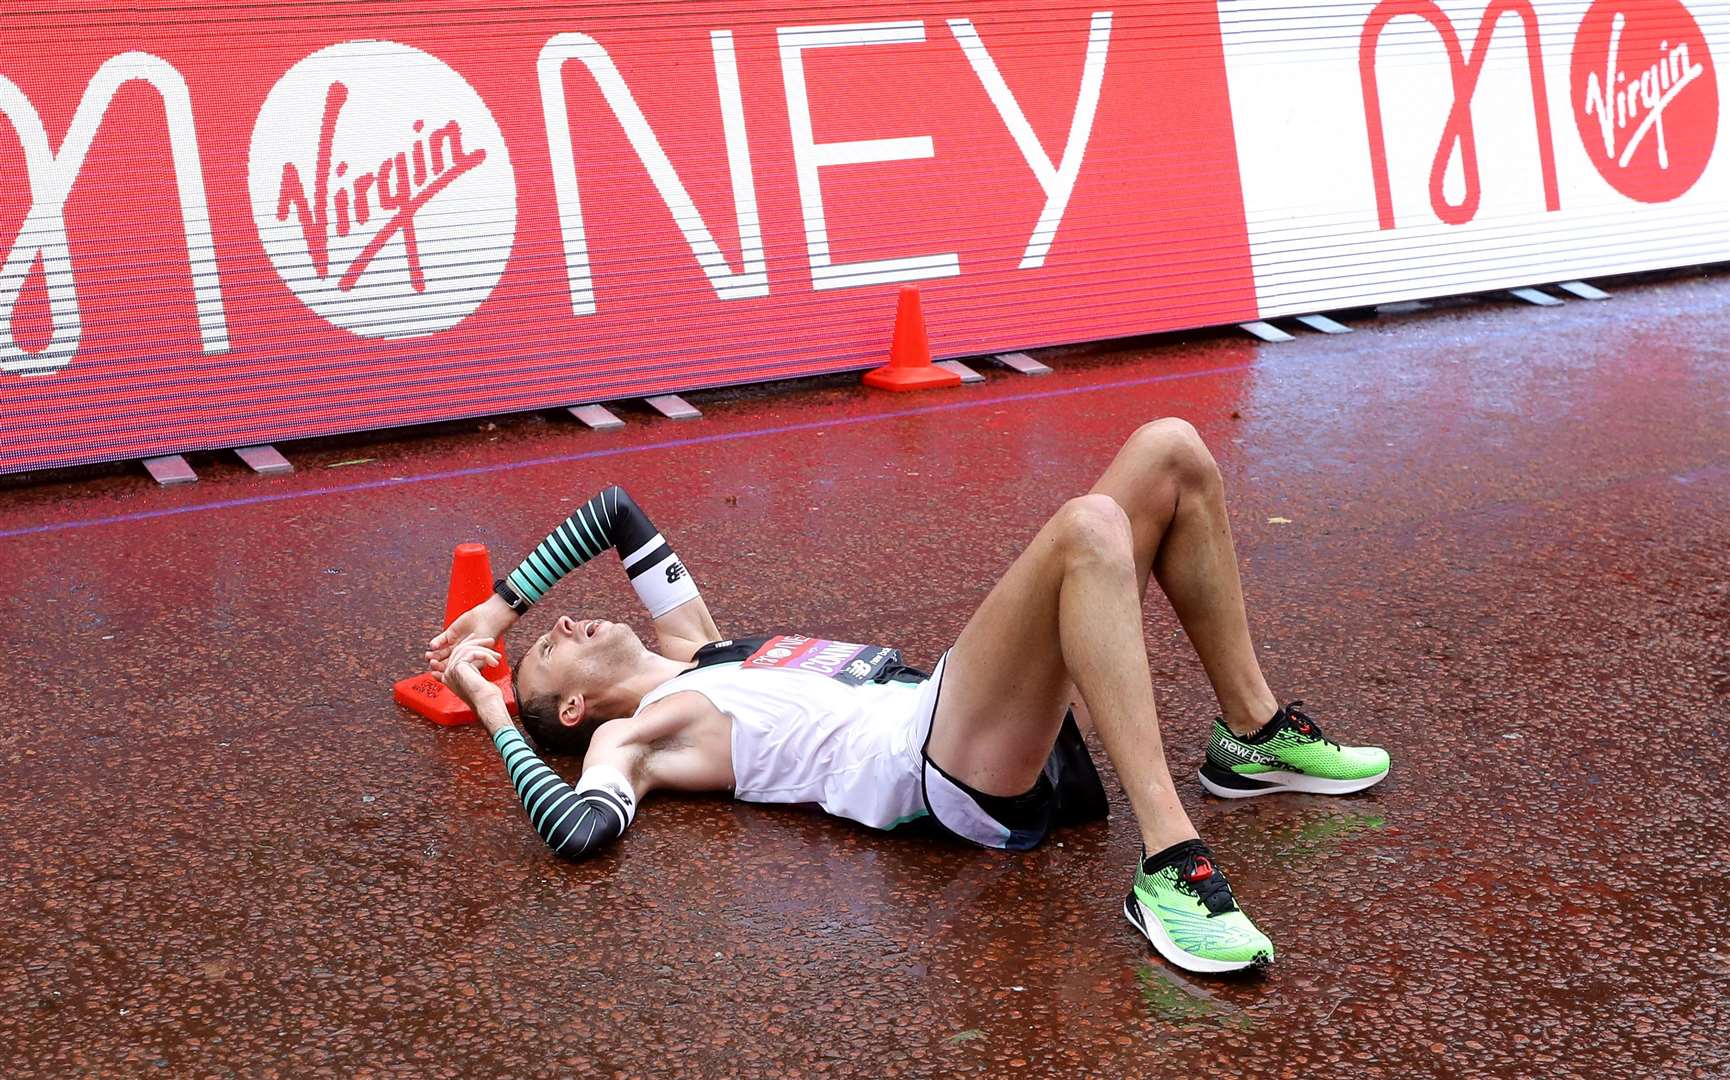 He was ready for a rest at the finish line (Richard Heathcoate/PA)